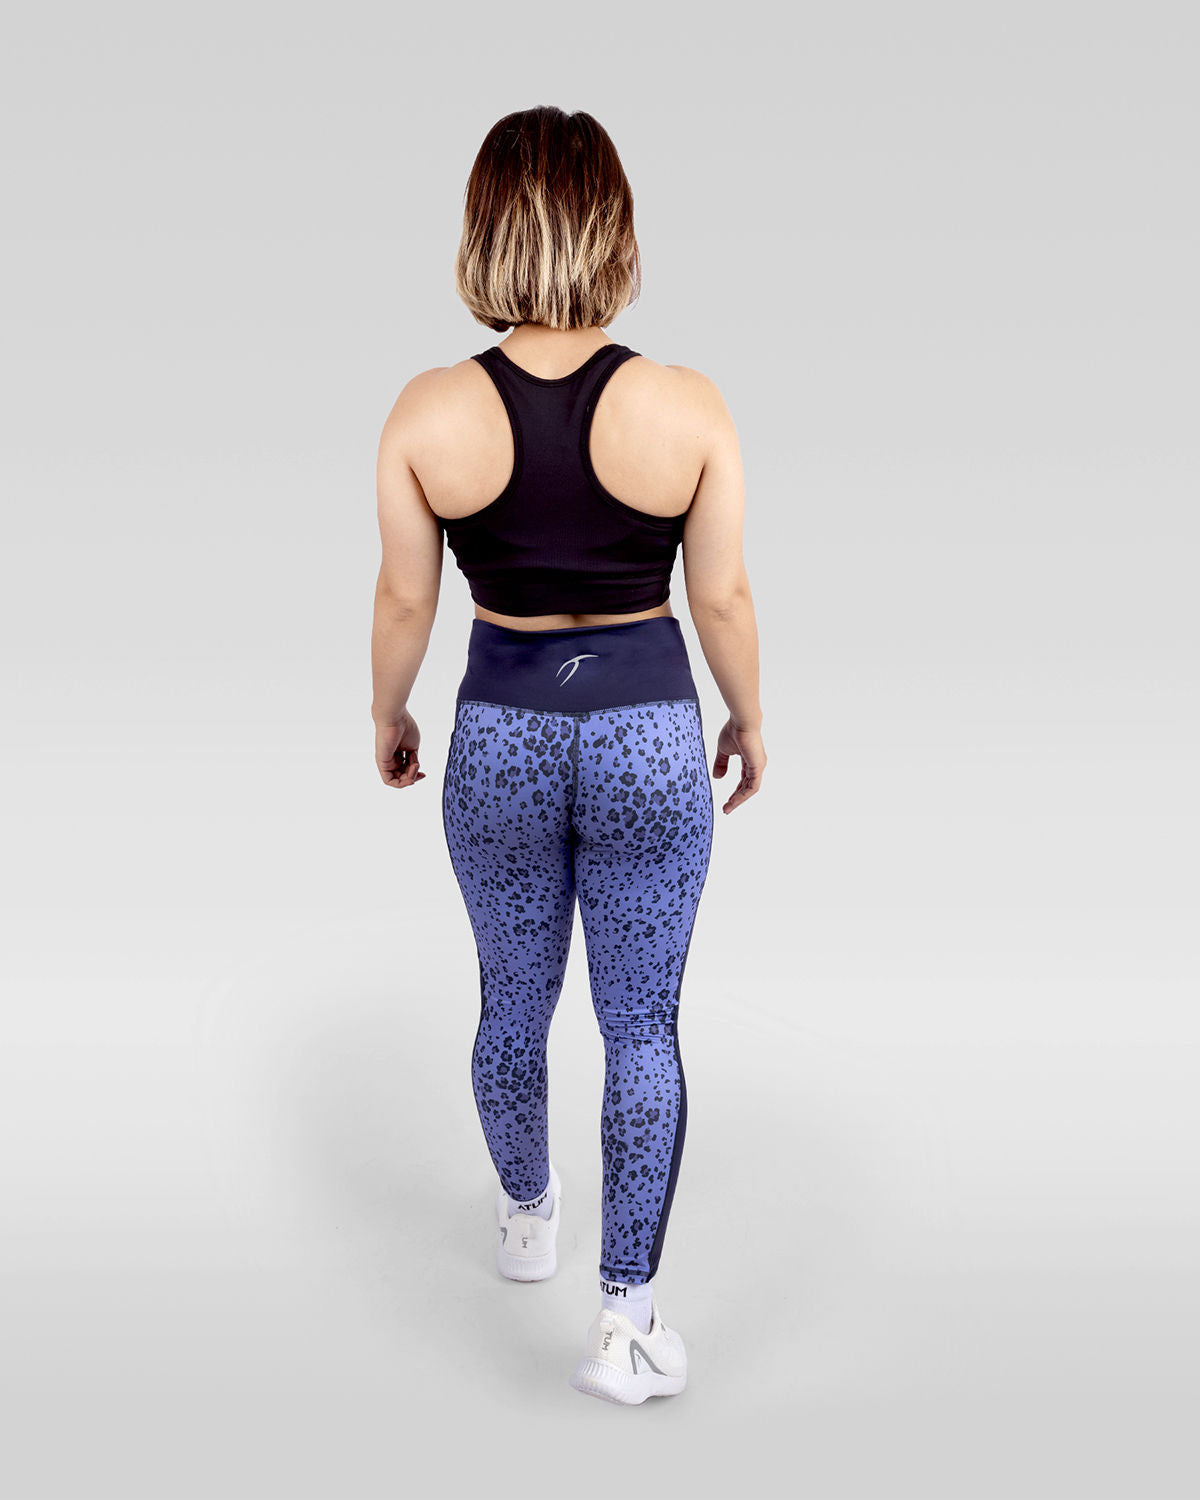 Photo by 𝗔𝗧𝗨𝗠 SPORTSWEAR ® on December 20, 2022. May be an image of 1 woman wears printed purple/navy floral leggings, and black sports bra with white shoes.